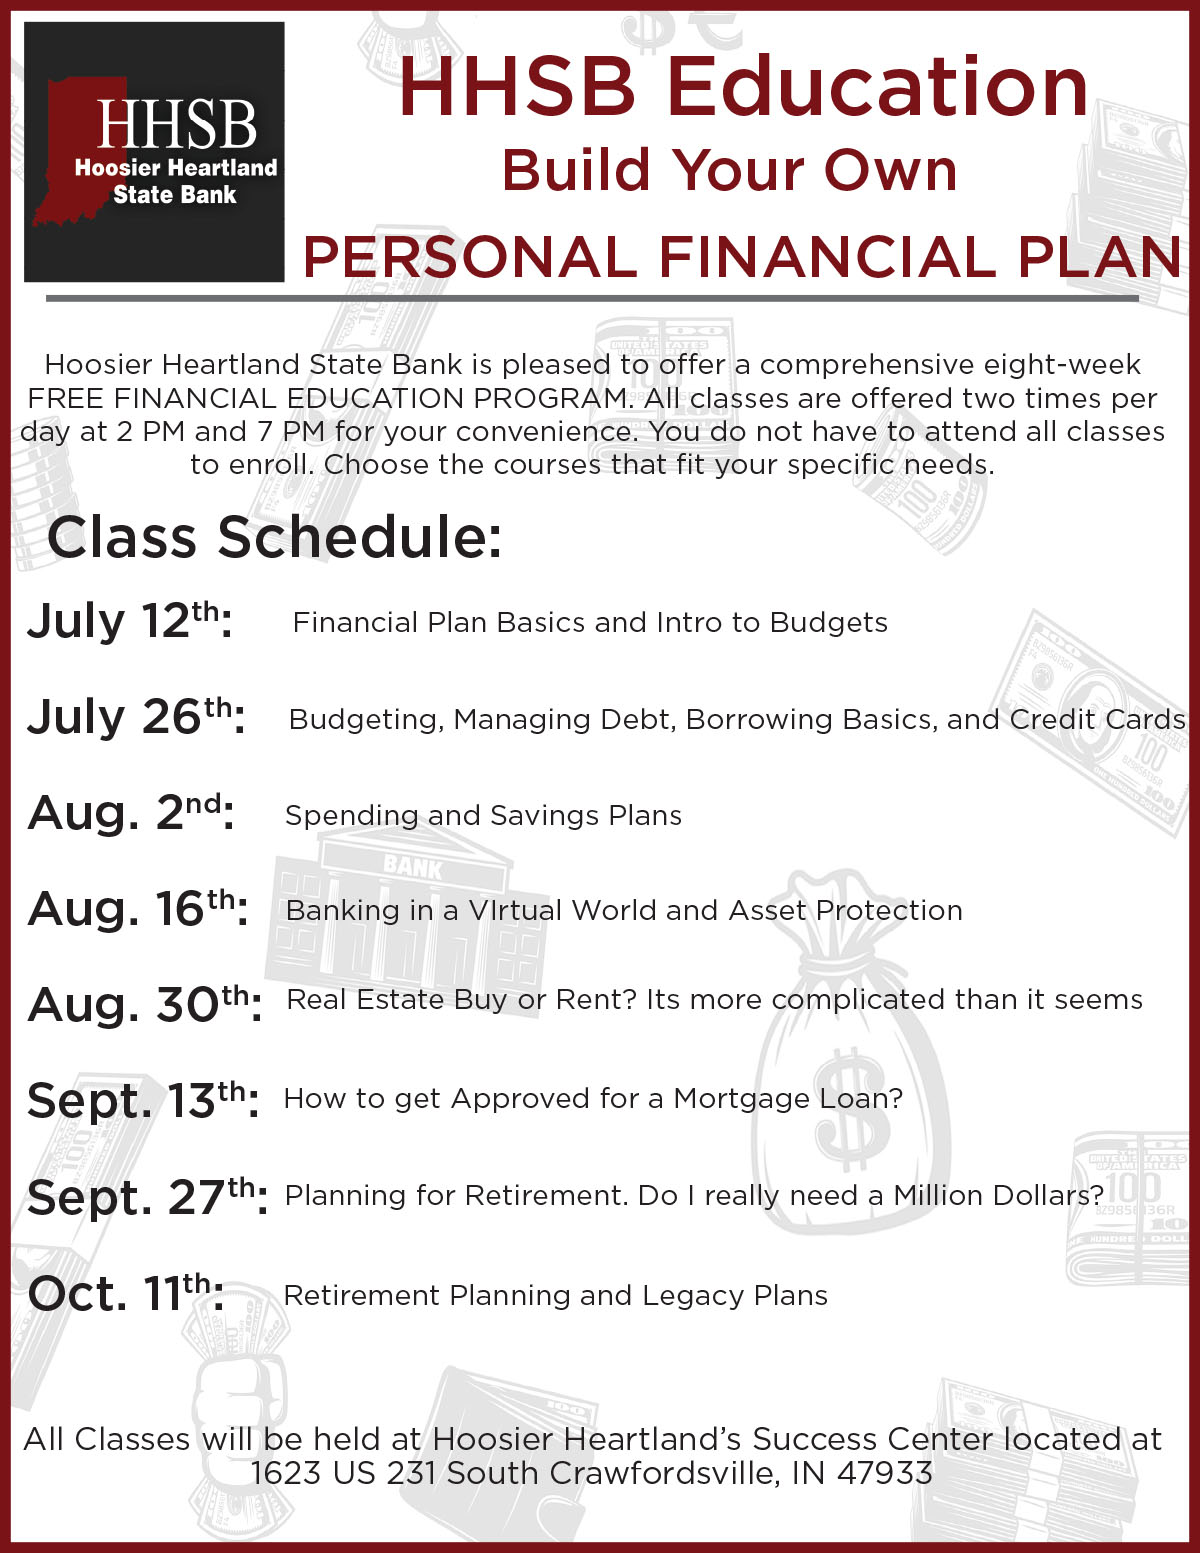 HHSB education build your own financial plan. Class schedule July 12, July 26, August 2, August 16, August 30, September 13, September 27 & October 11 @ HHSB Success Center.